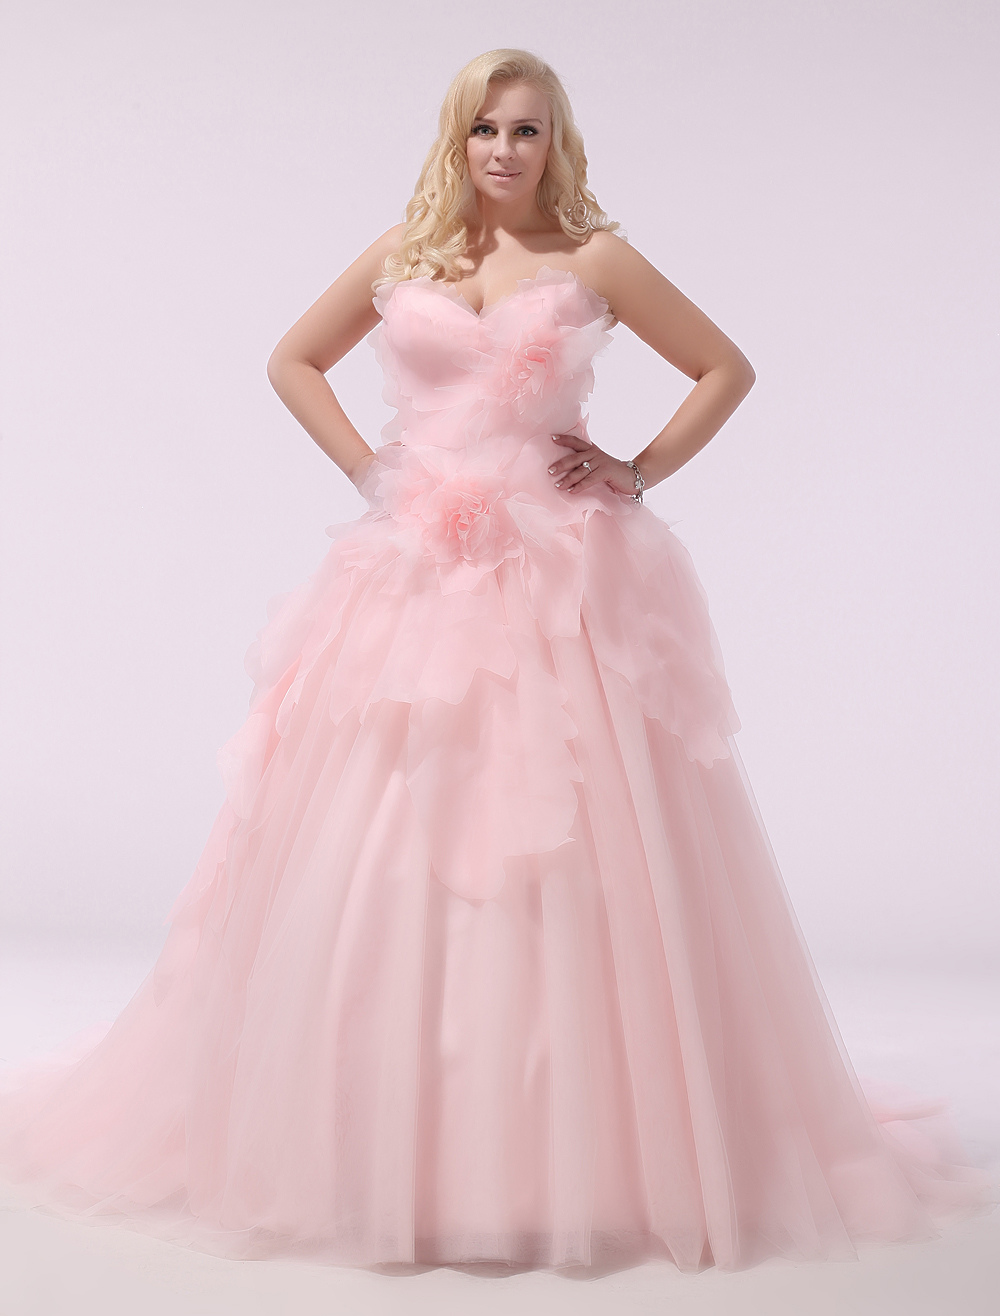 Best Pink Organza Wedding Dress of the decade The ultimate guide 